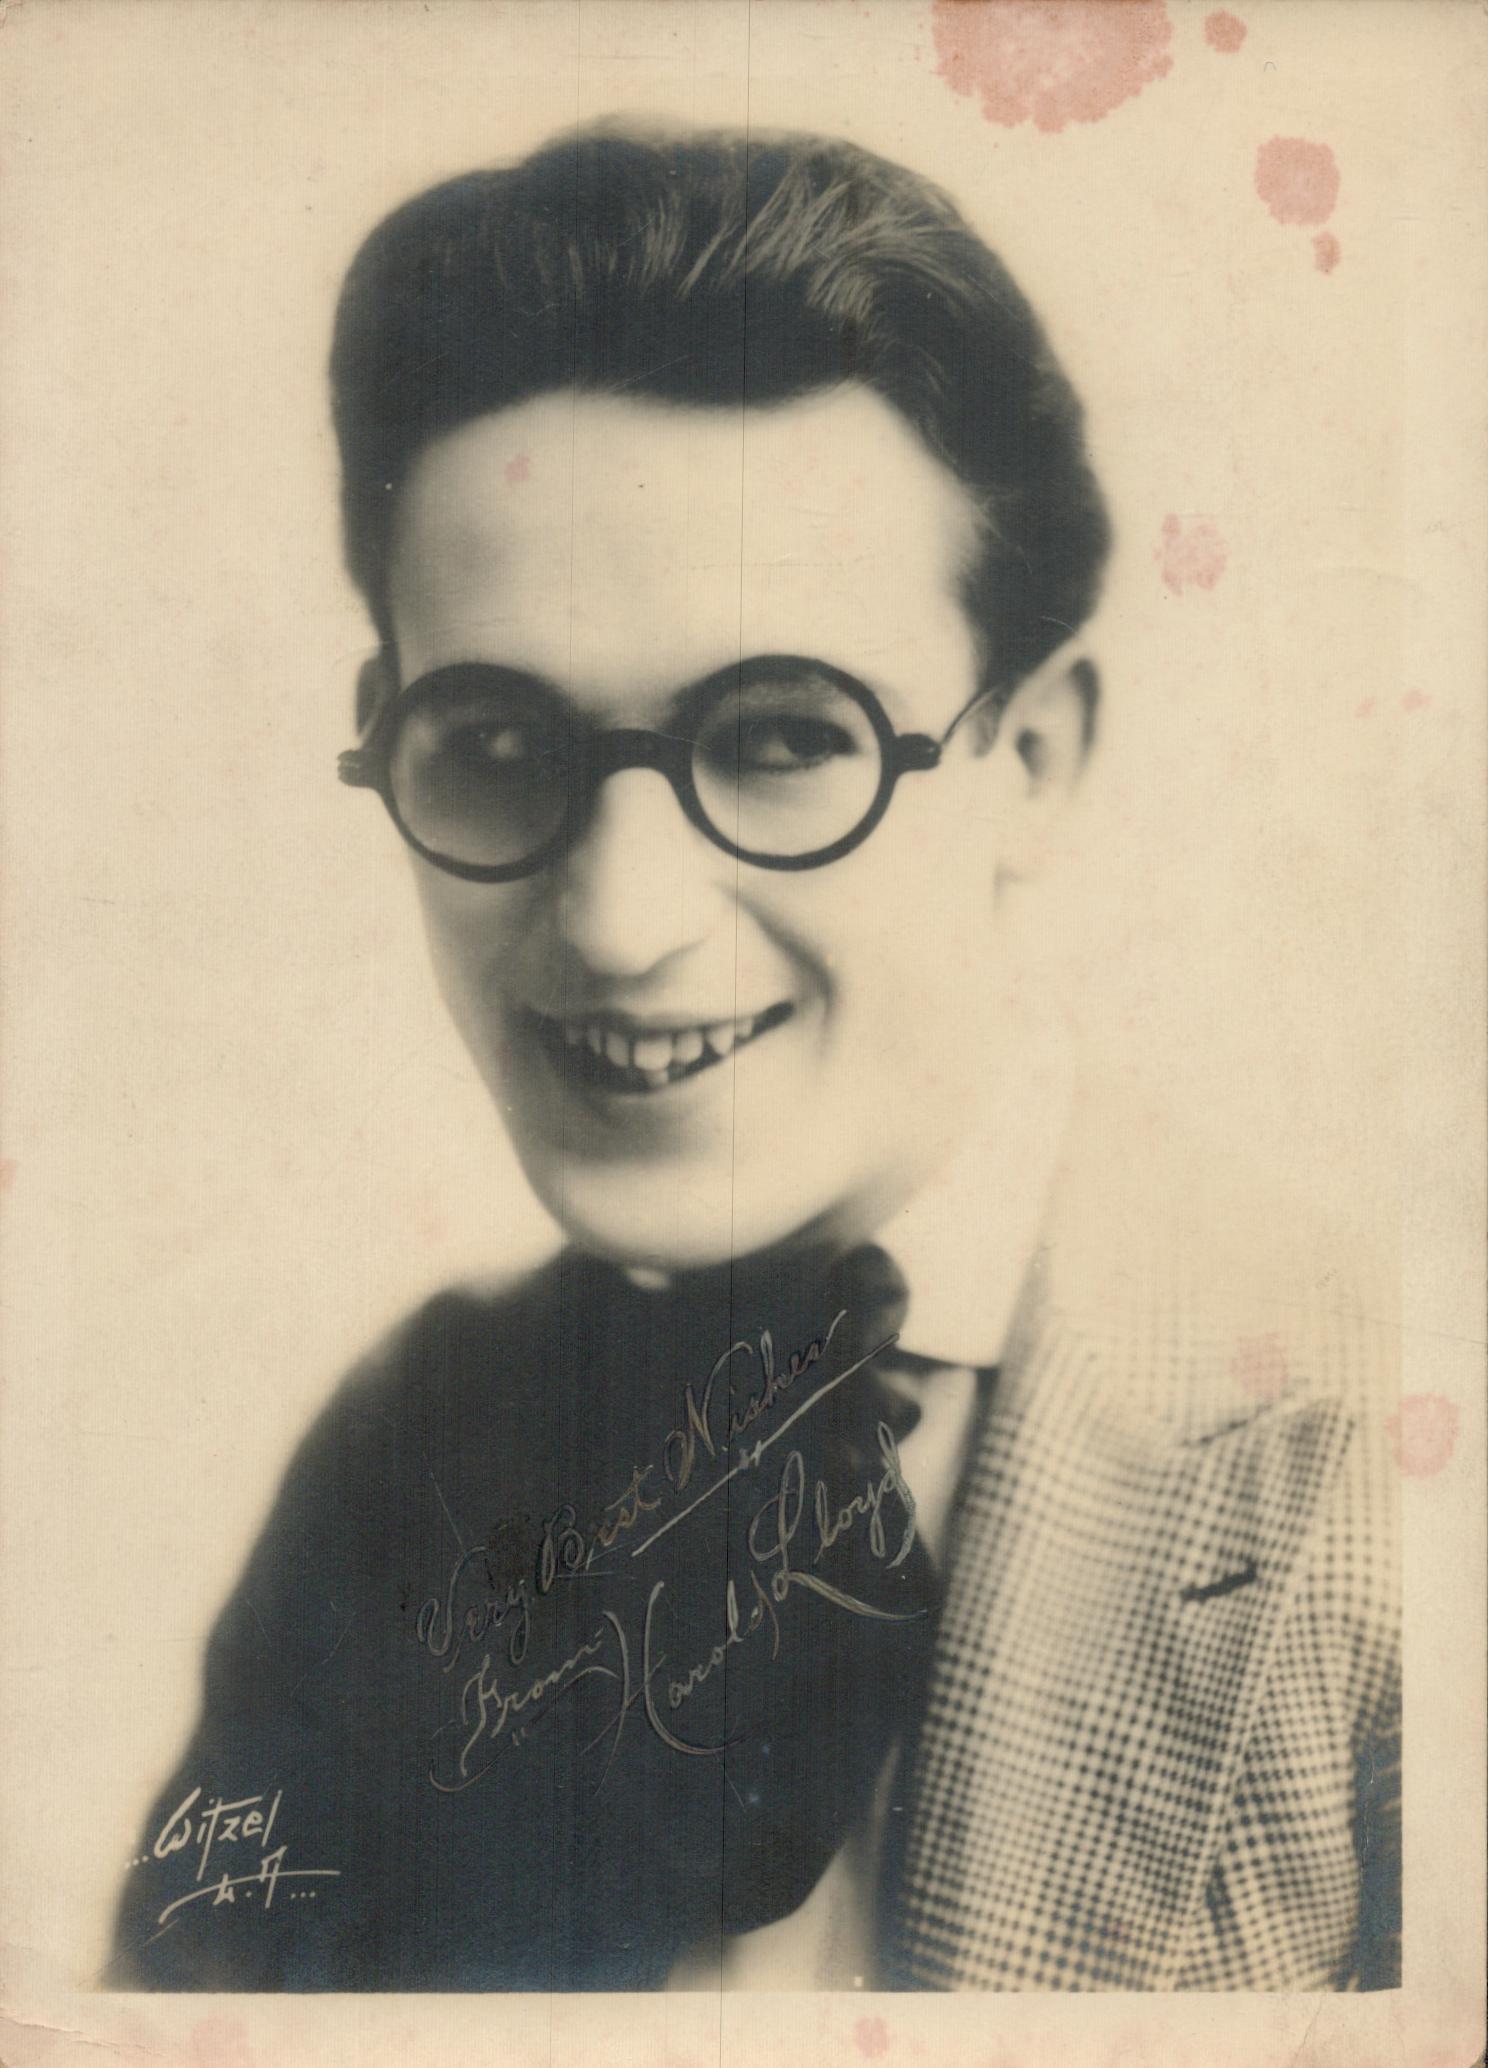 Harold Lloyd signed 7x5 inch vintage sepia photo. Good Condition. All autographs come with a